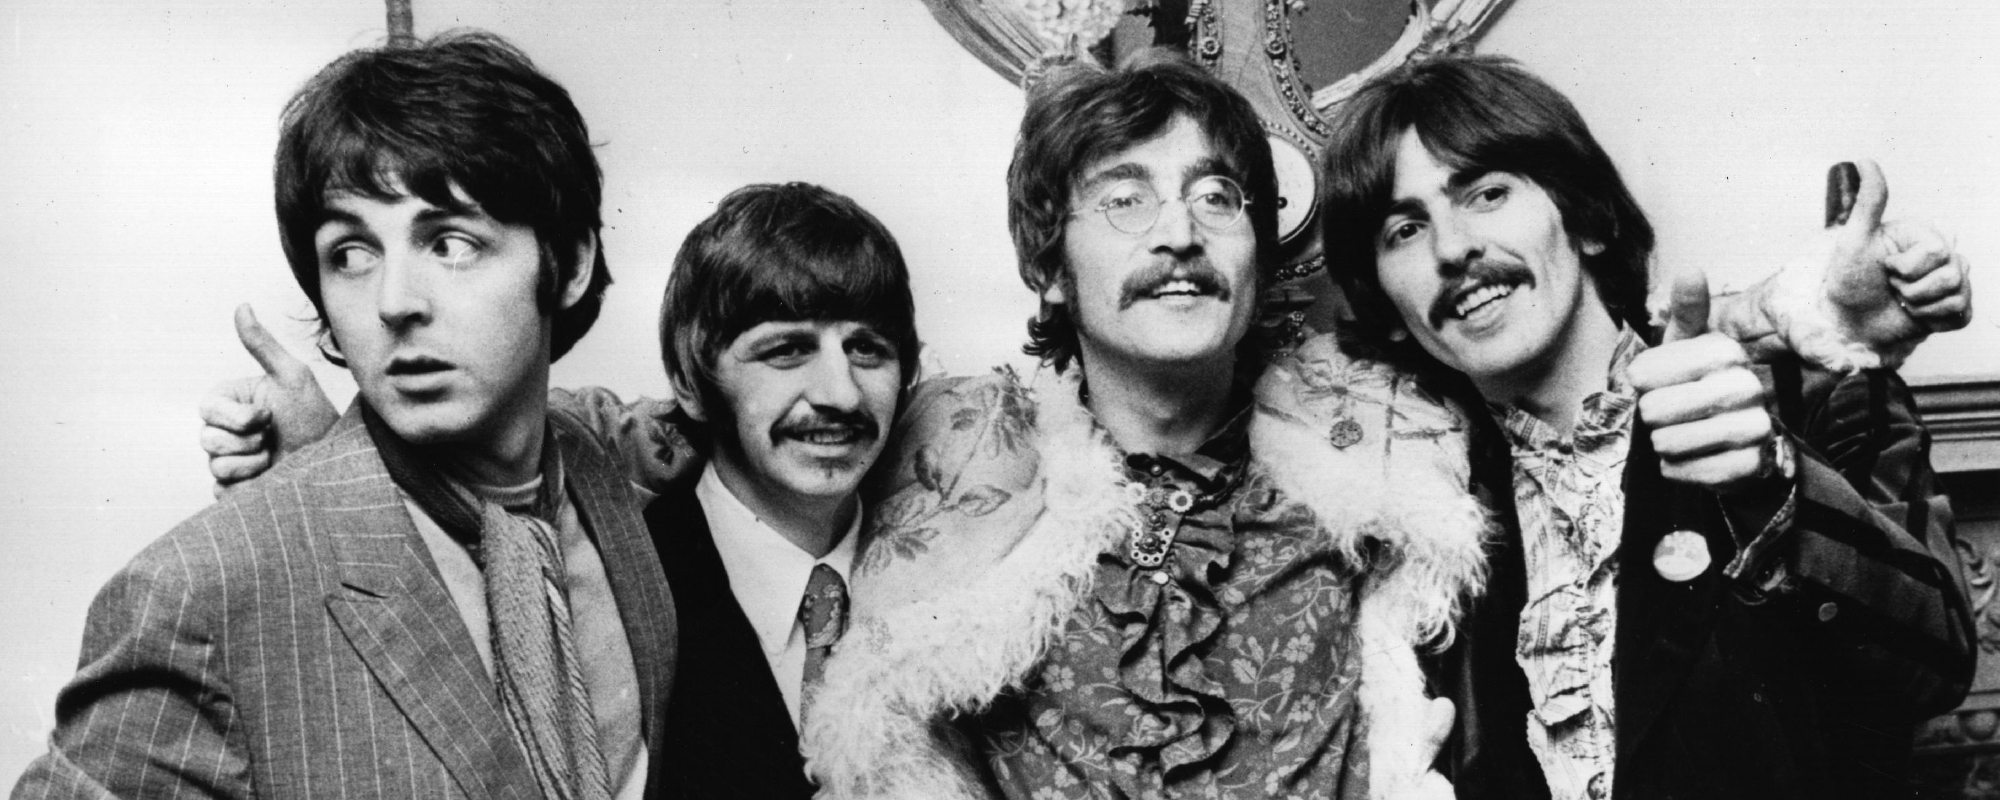 Behind the Song Lyrics: “Don’t Let Me Down,” The Beatles